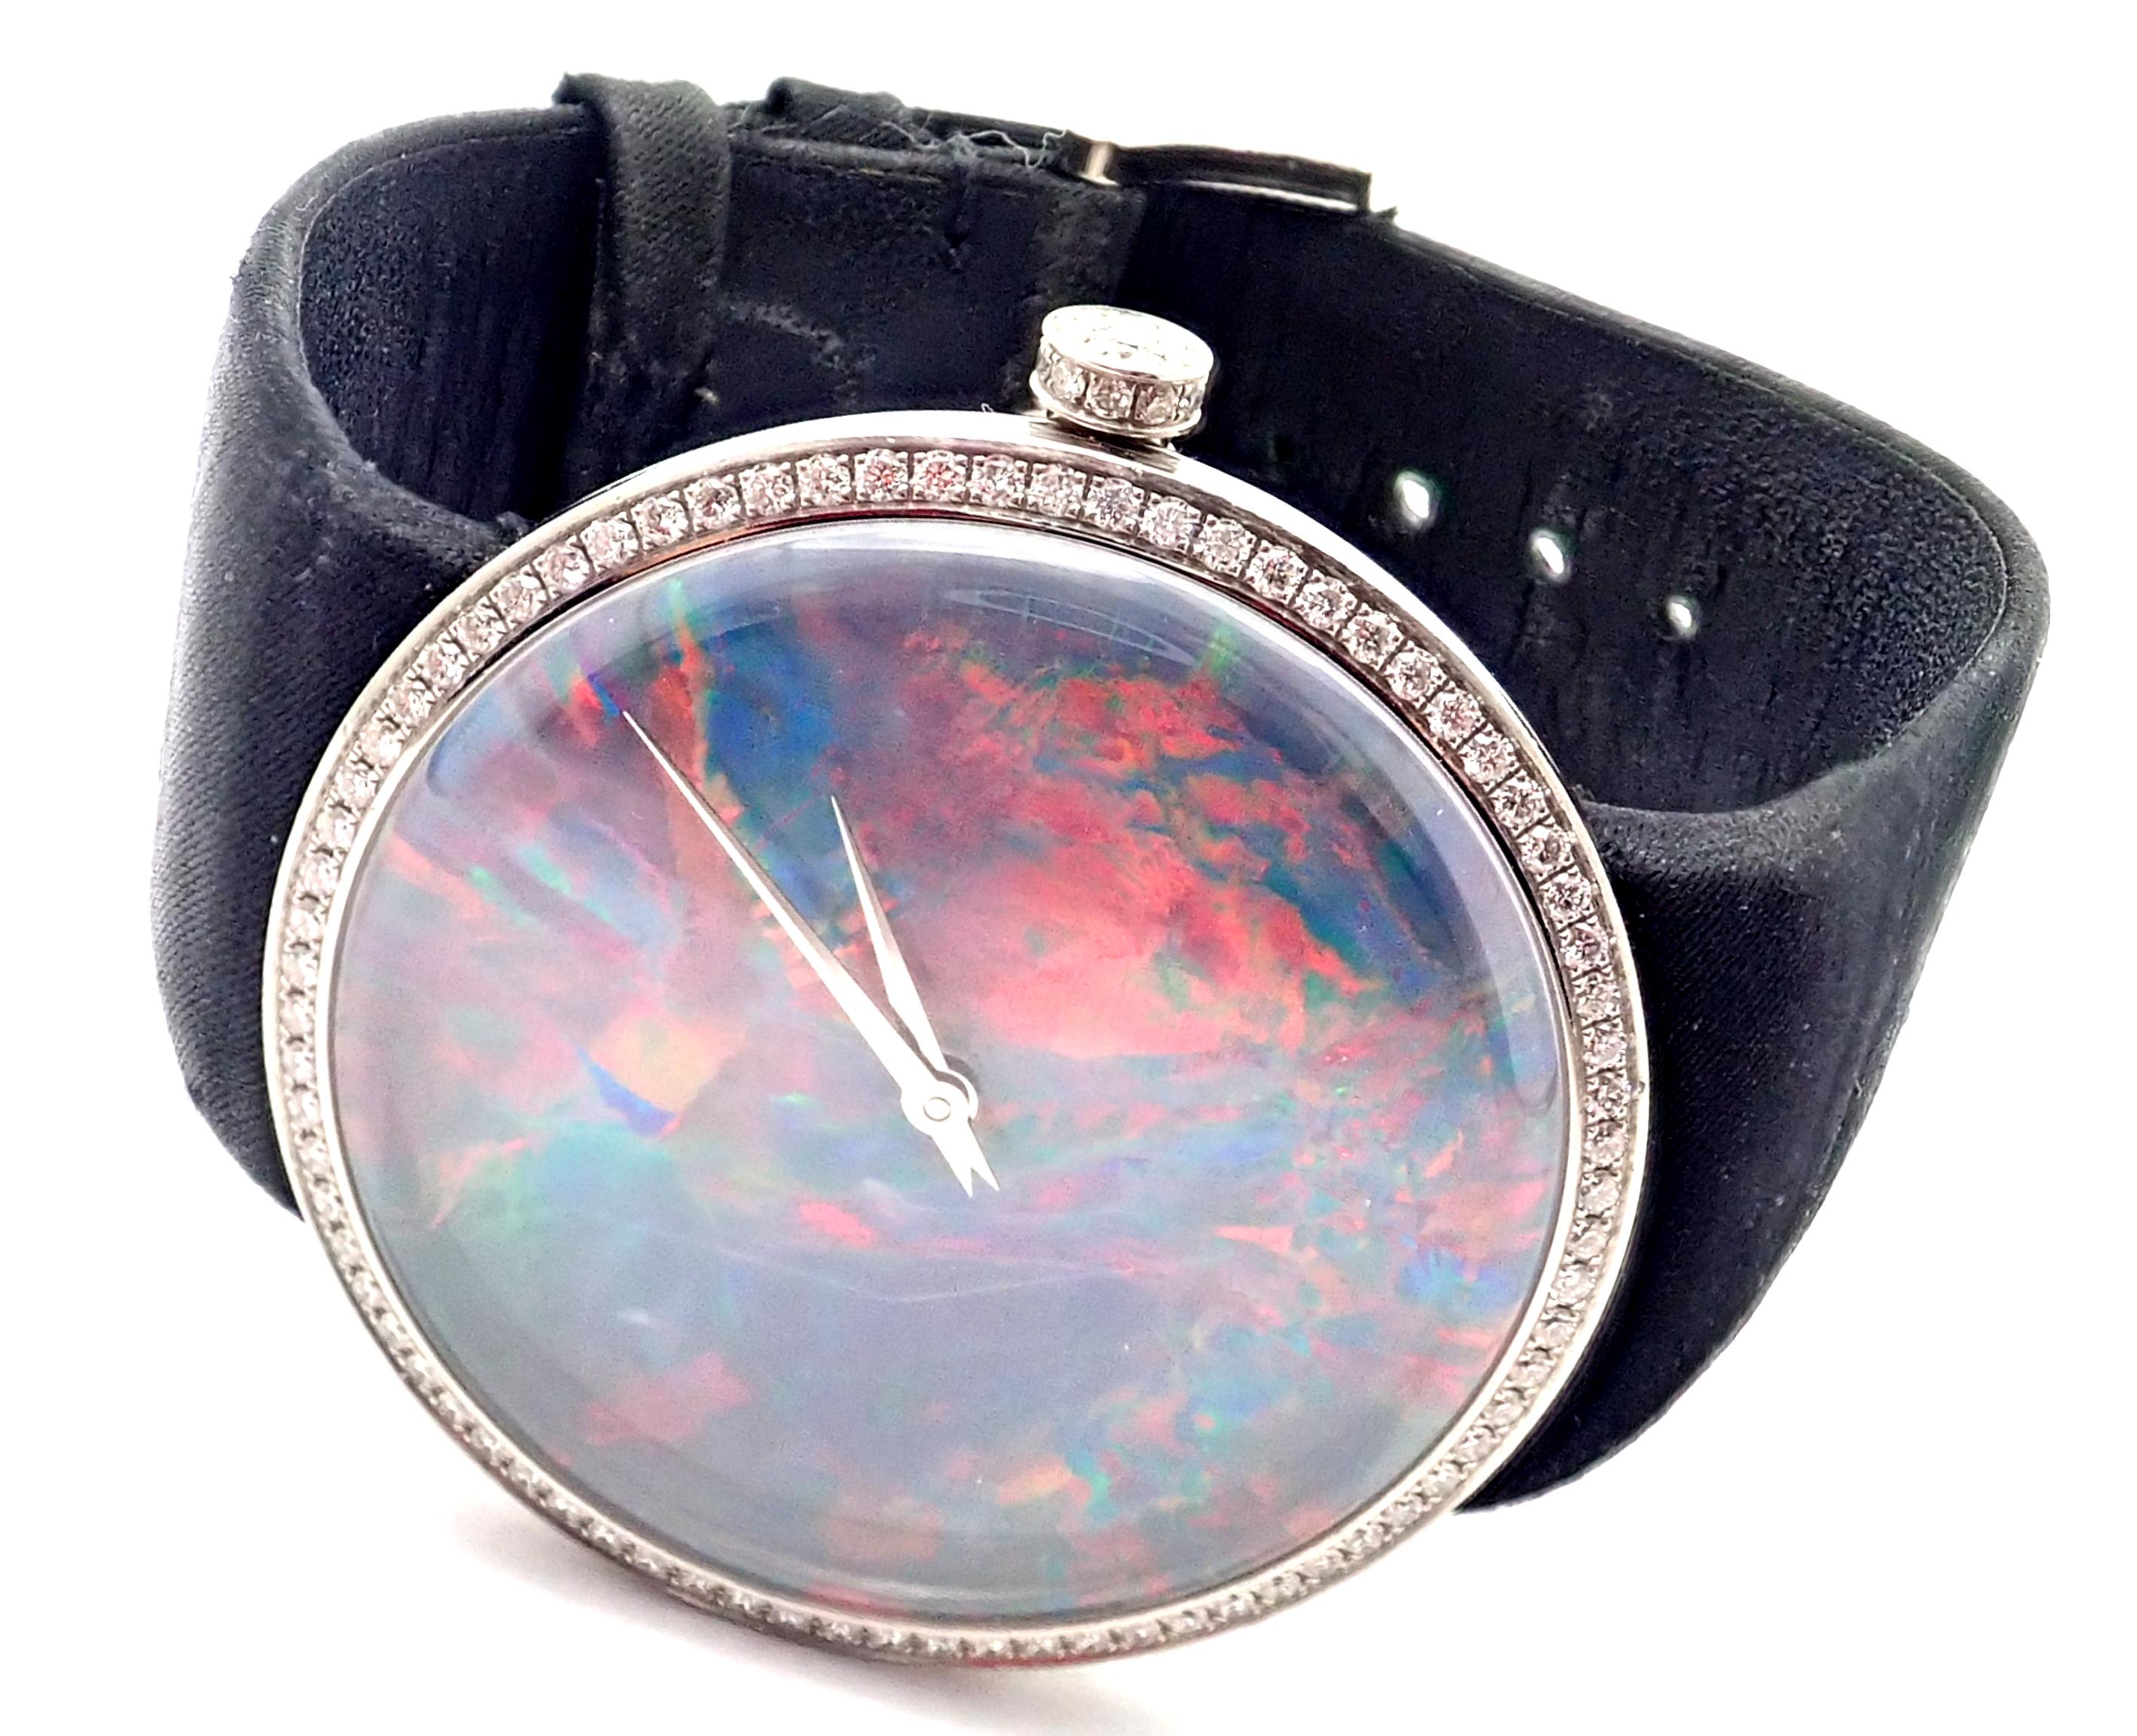 18k White Gold Diamond Australian black opal dial Automatic 38mm Limited Edition Watch.
With 78 round brilliant cut diamonds and Australian black opal
This watch is Number 3 in a limited edition of 10 timepieces.
Details: 
Case: 38 mm 18K white gold